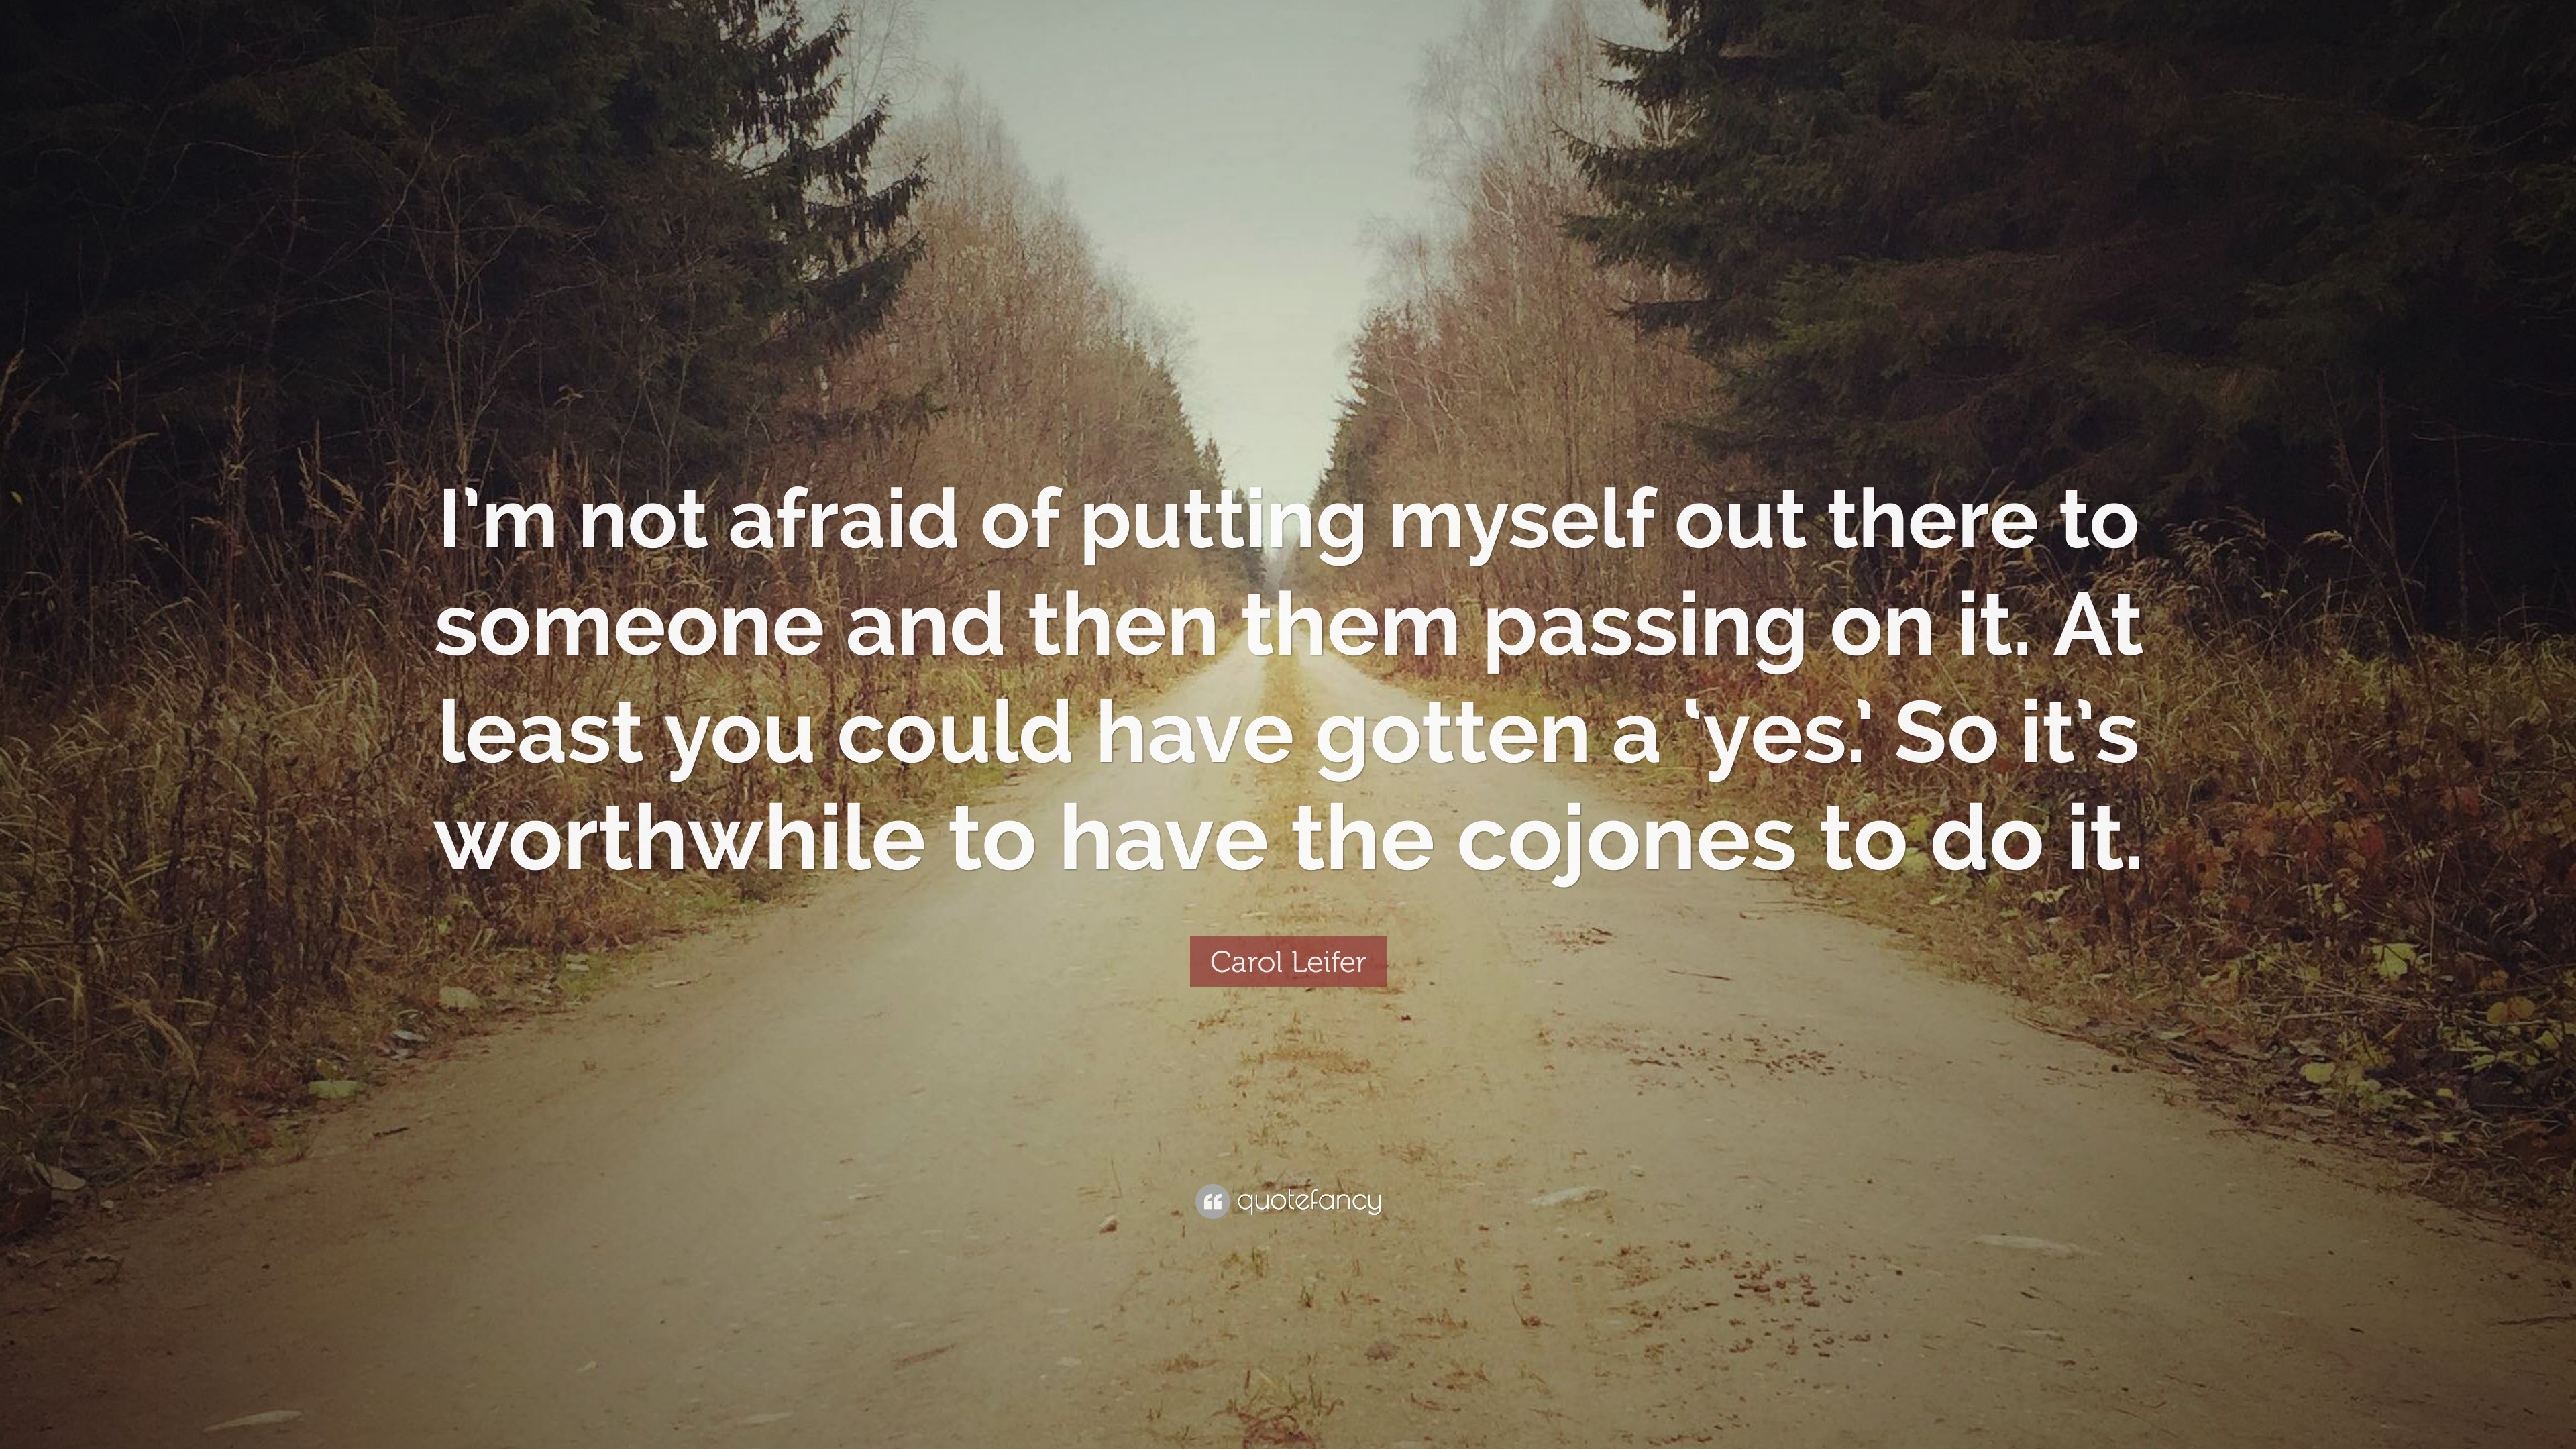 Carol Leifer Quote: “I'm not afraid of putting myself out there to